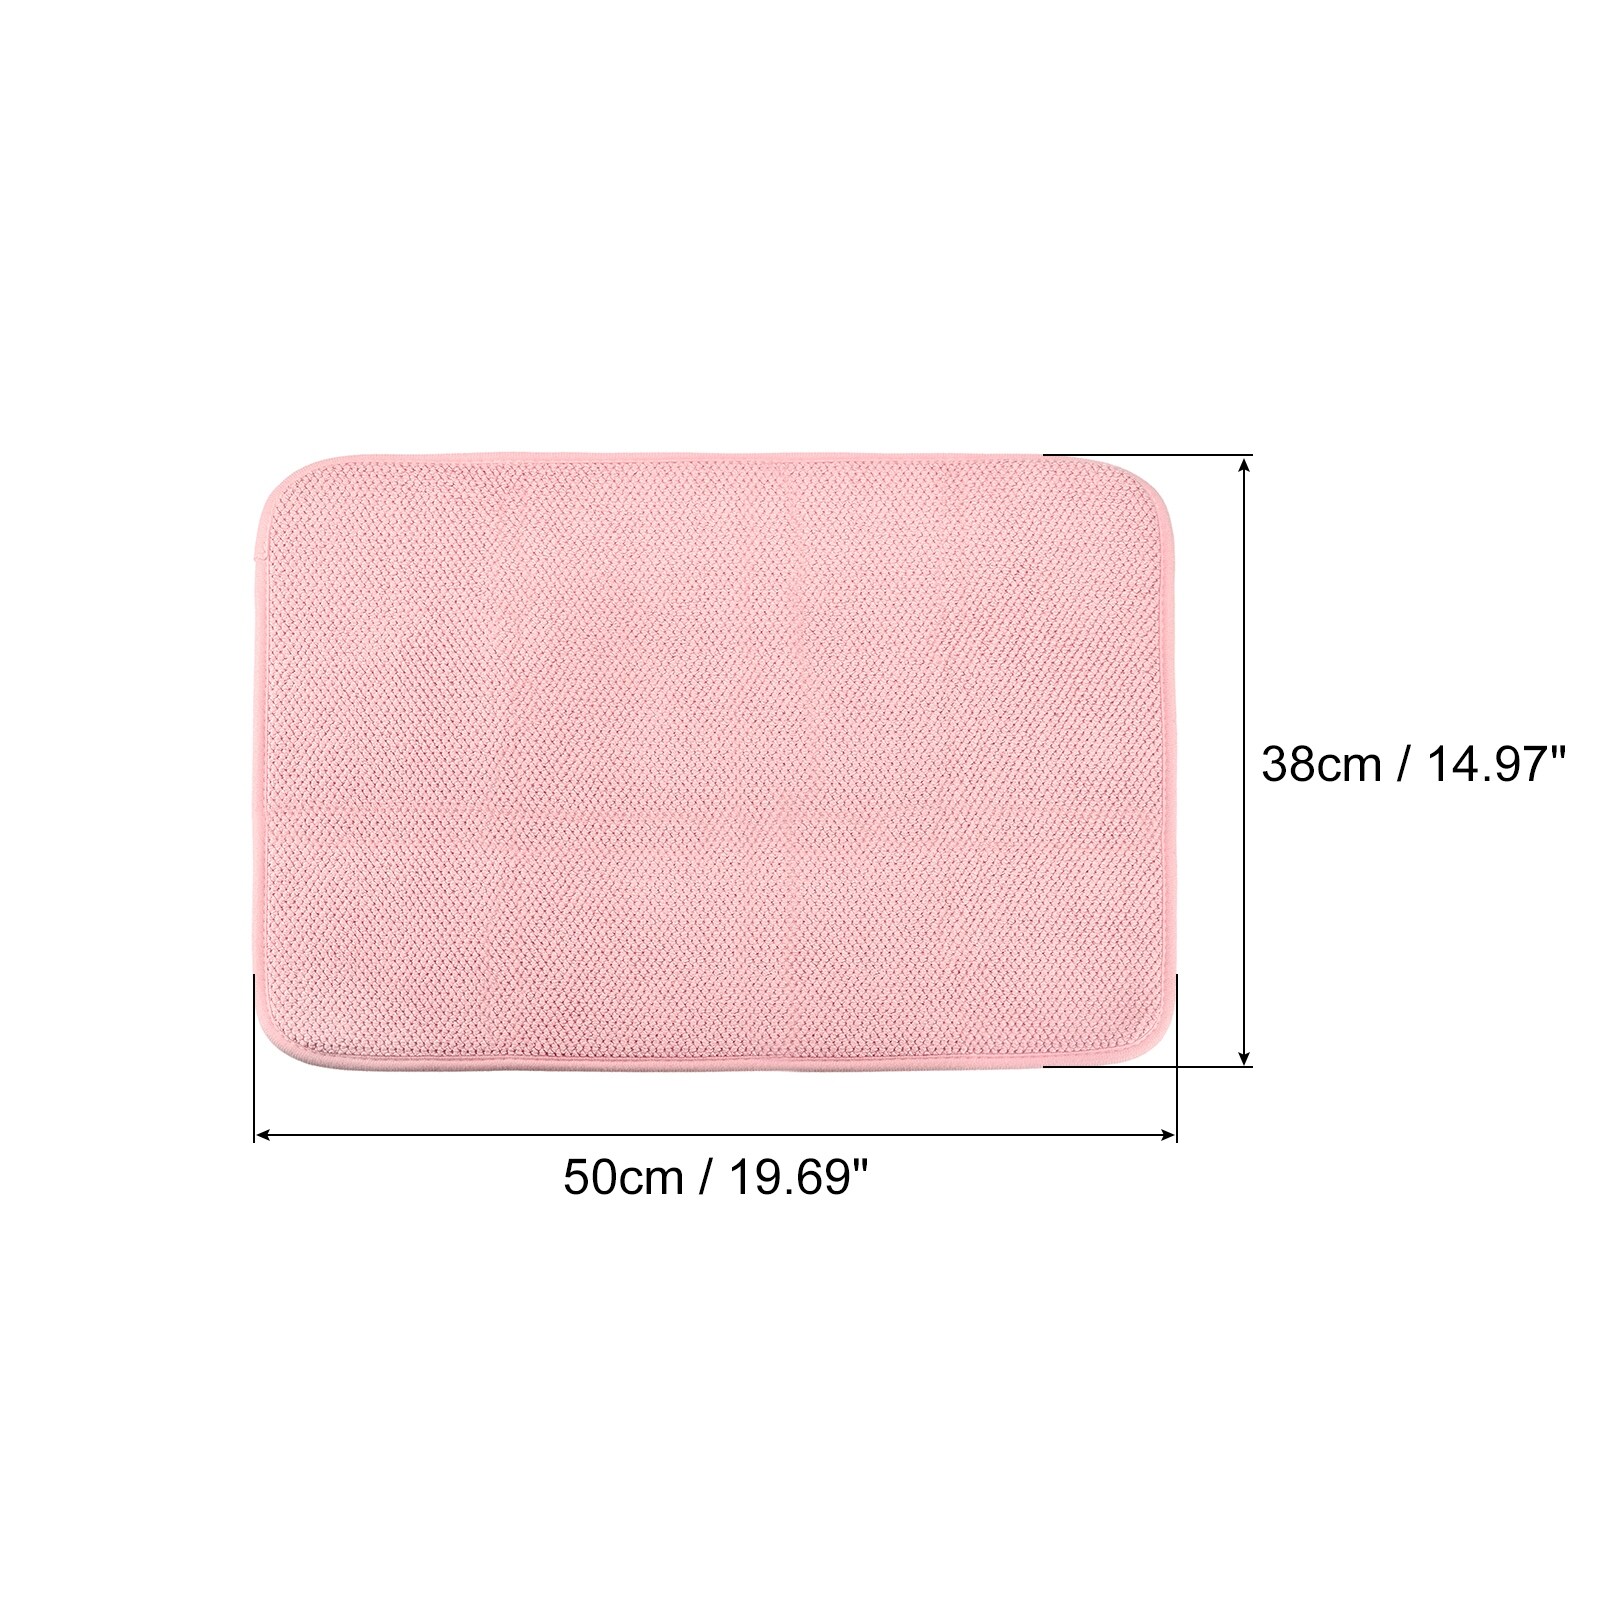 https://ak1.ostkcdn.com/images/products/is/images/direct/6a873bab10bf94d0852468790500e6cece1809be/Dish-Drying-Mat-2pcs%2C-Microfiber-Dish-Drying-Pad-Dish-Drainer-Mat-Red.jpg